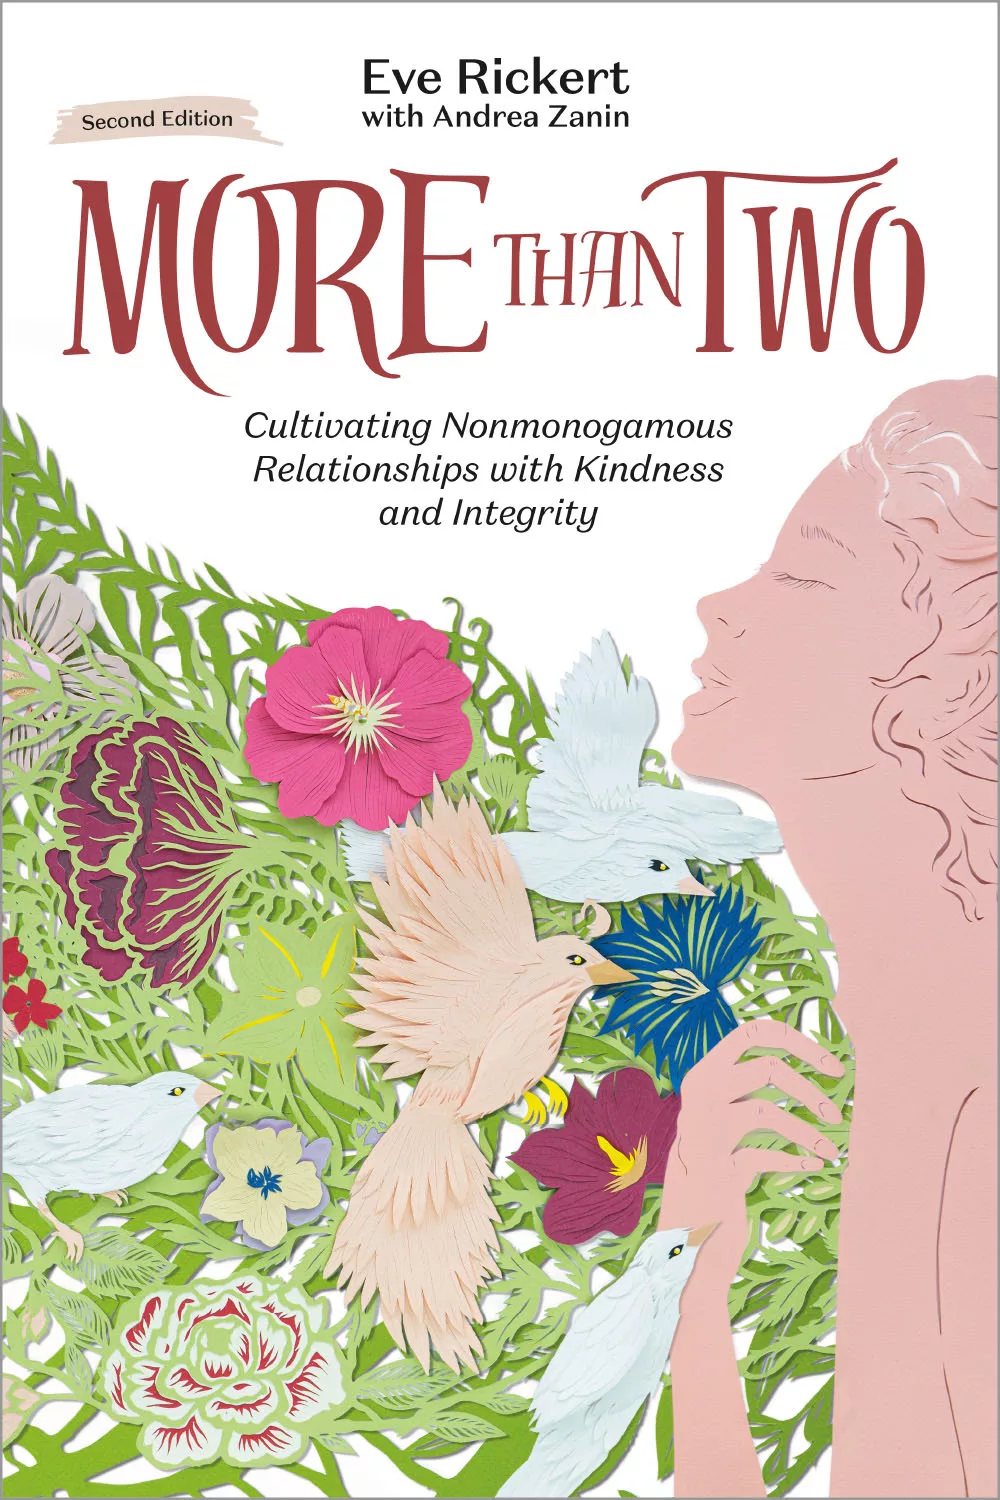 The front cover of the second edition of More Than Two